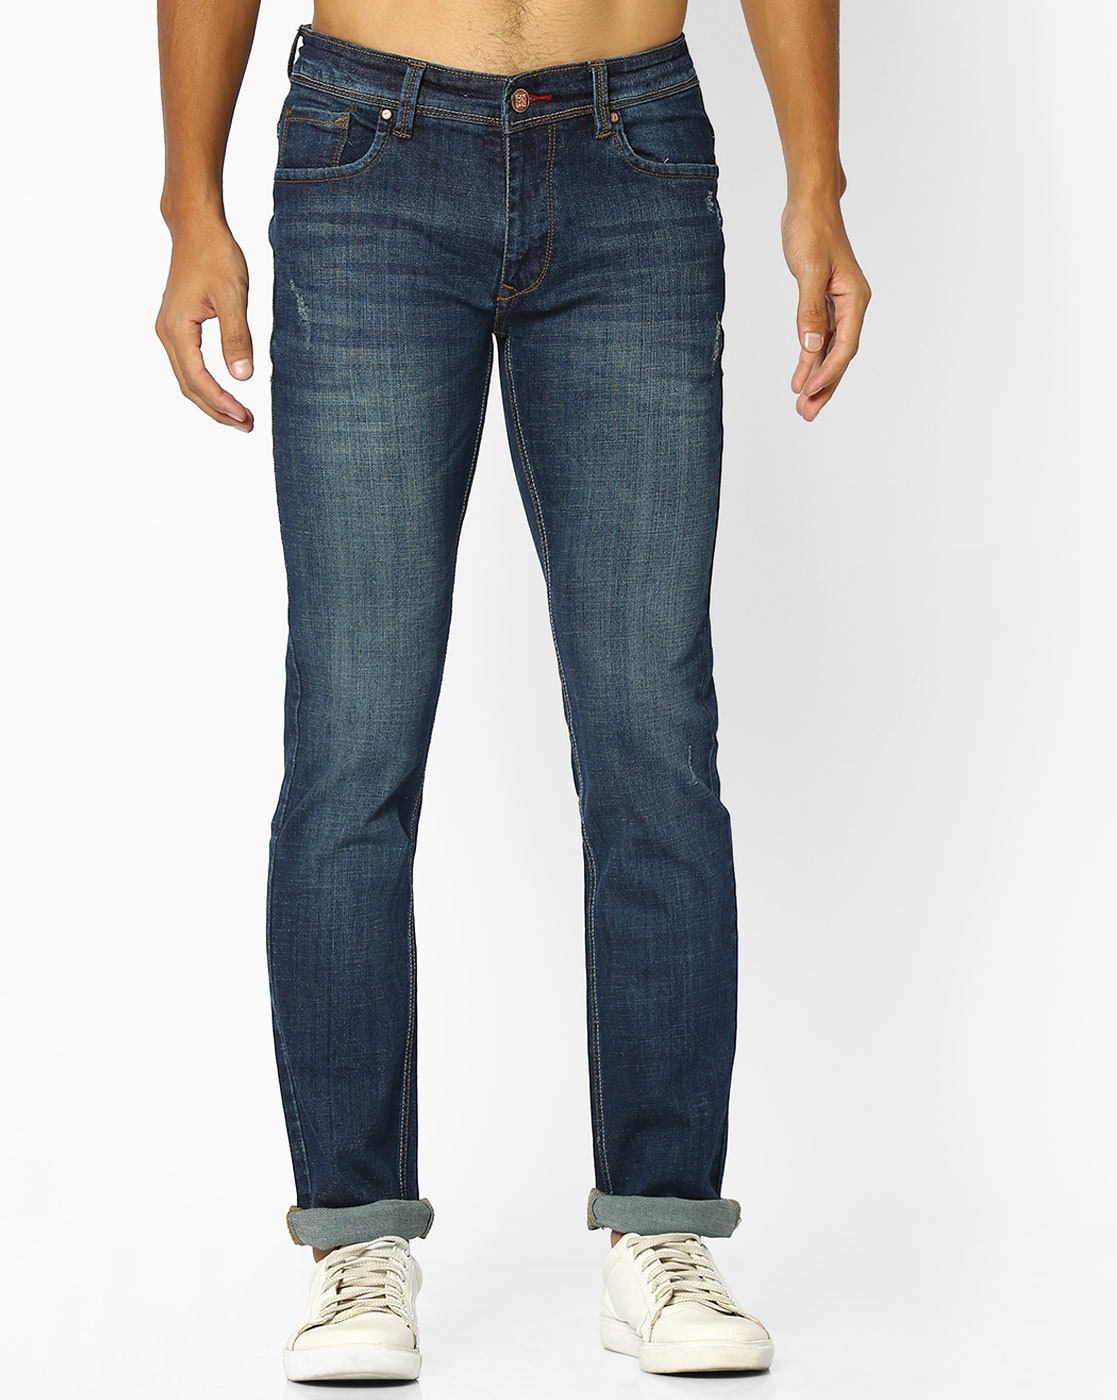 dnmx tapered jeans